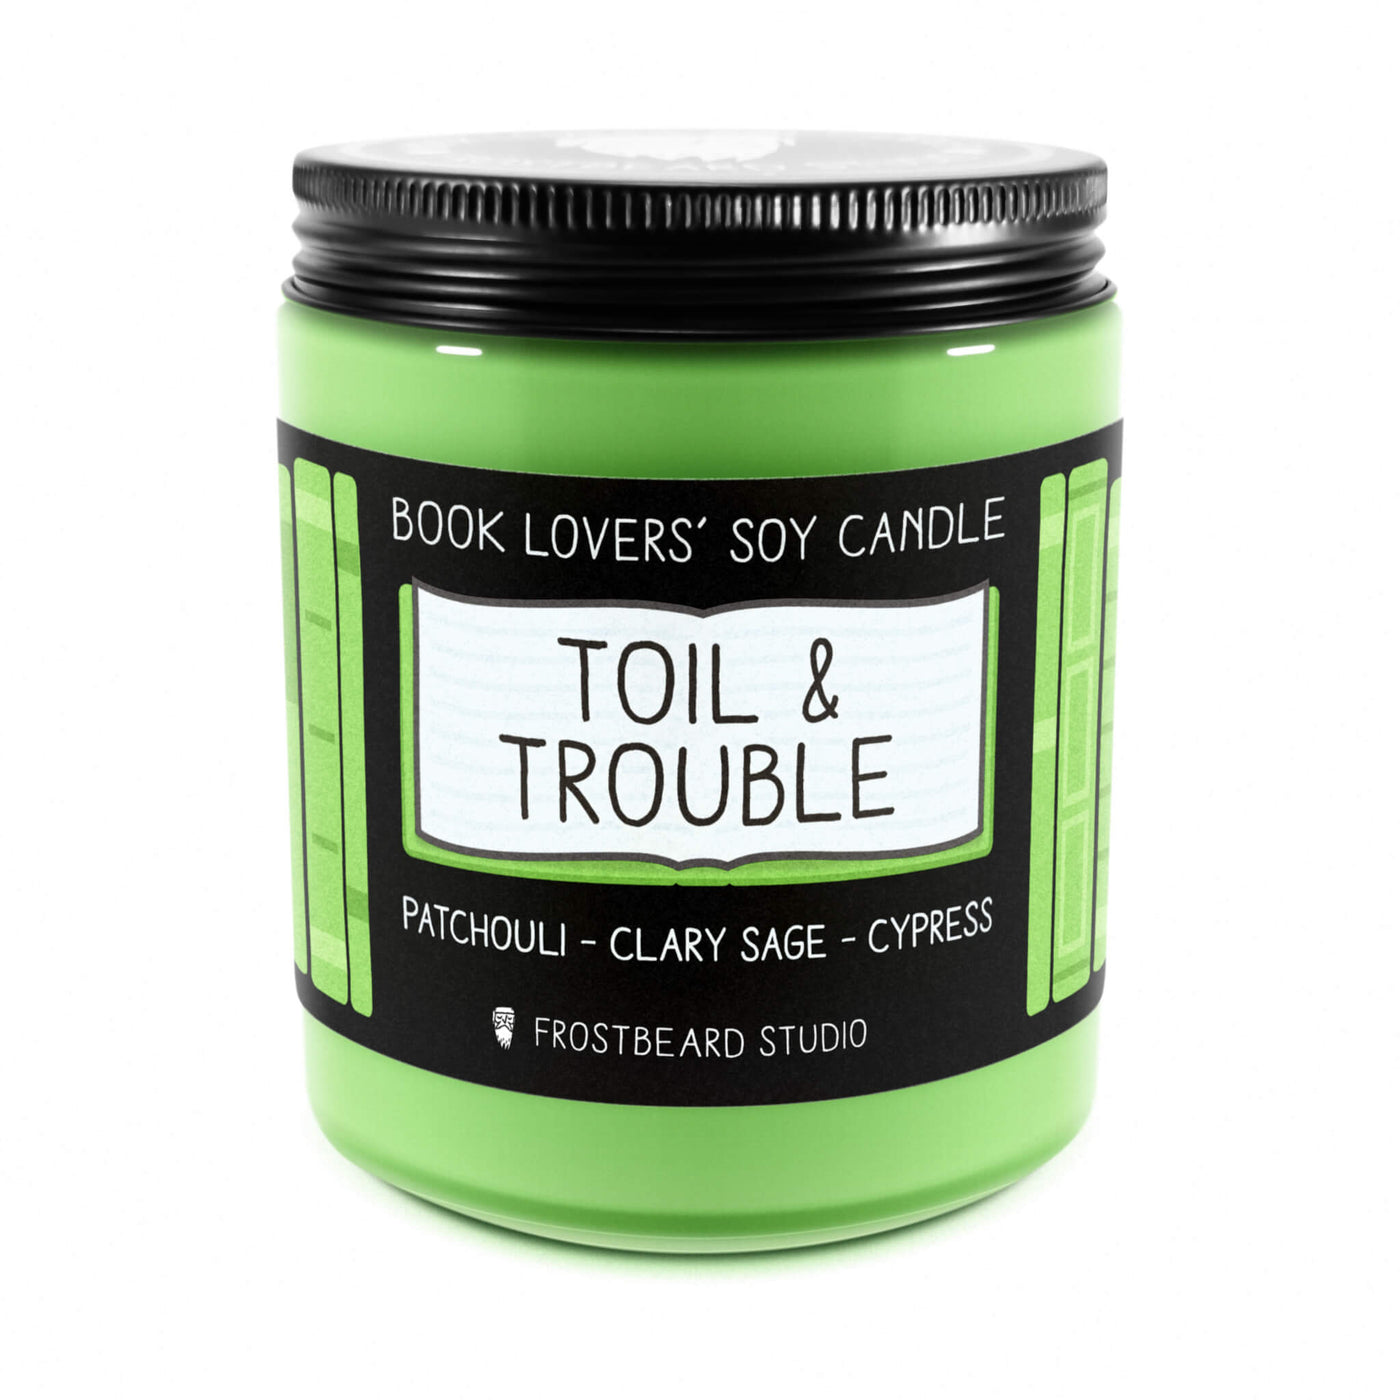 Toil & Trouble - 8 oz Jar - Book Lovers' Soy Candle - Frostbeard Studio